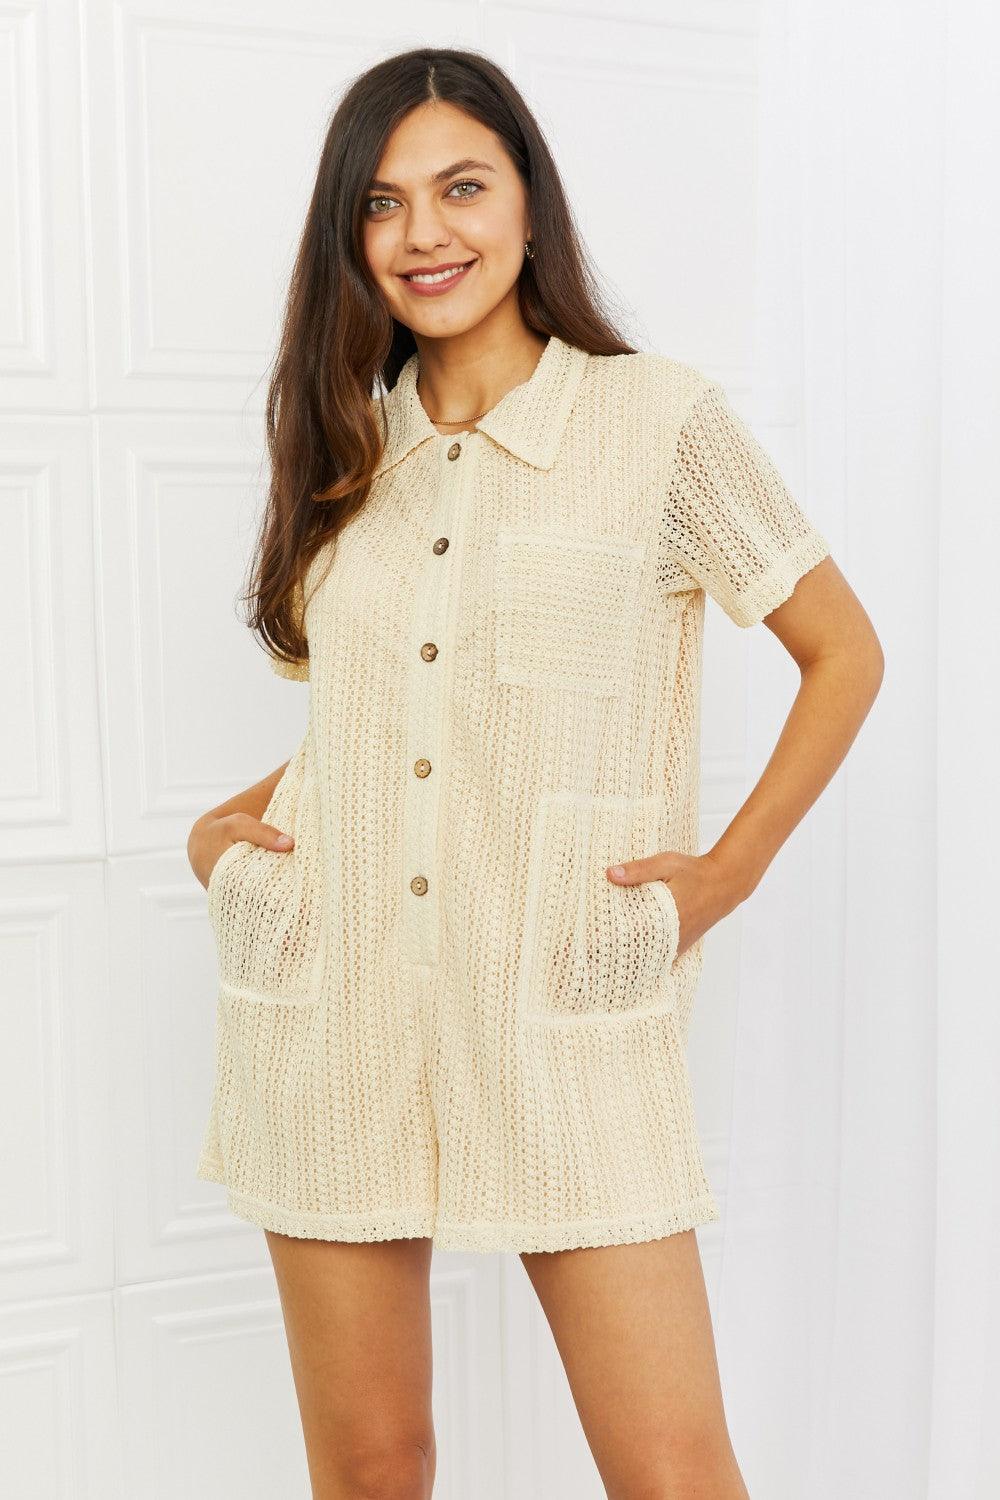 HEYSON Ready For The Day Crochet Romper - Glamorous Boutique USA L.L.C.